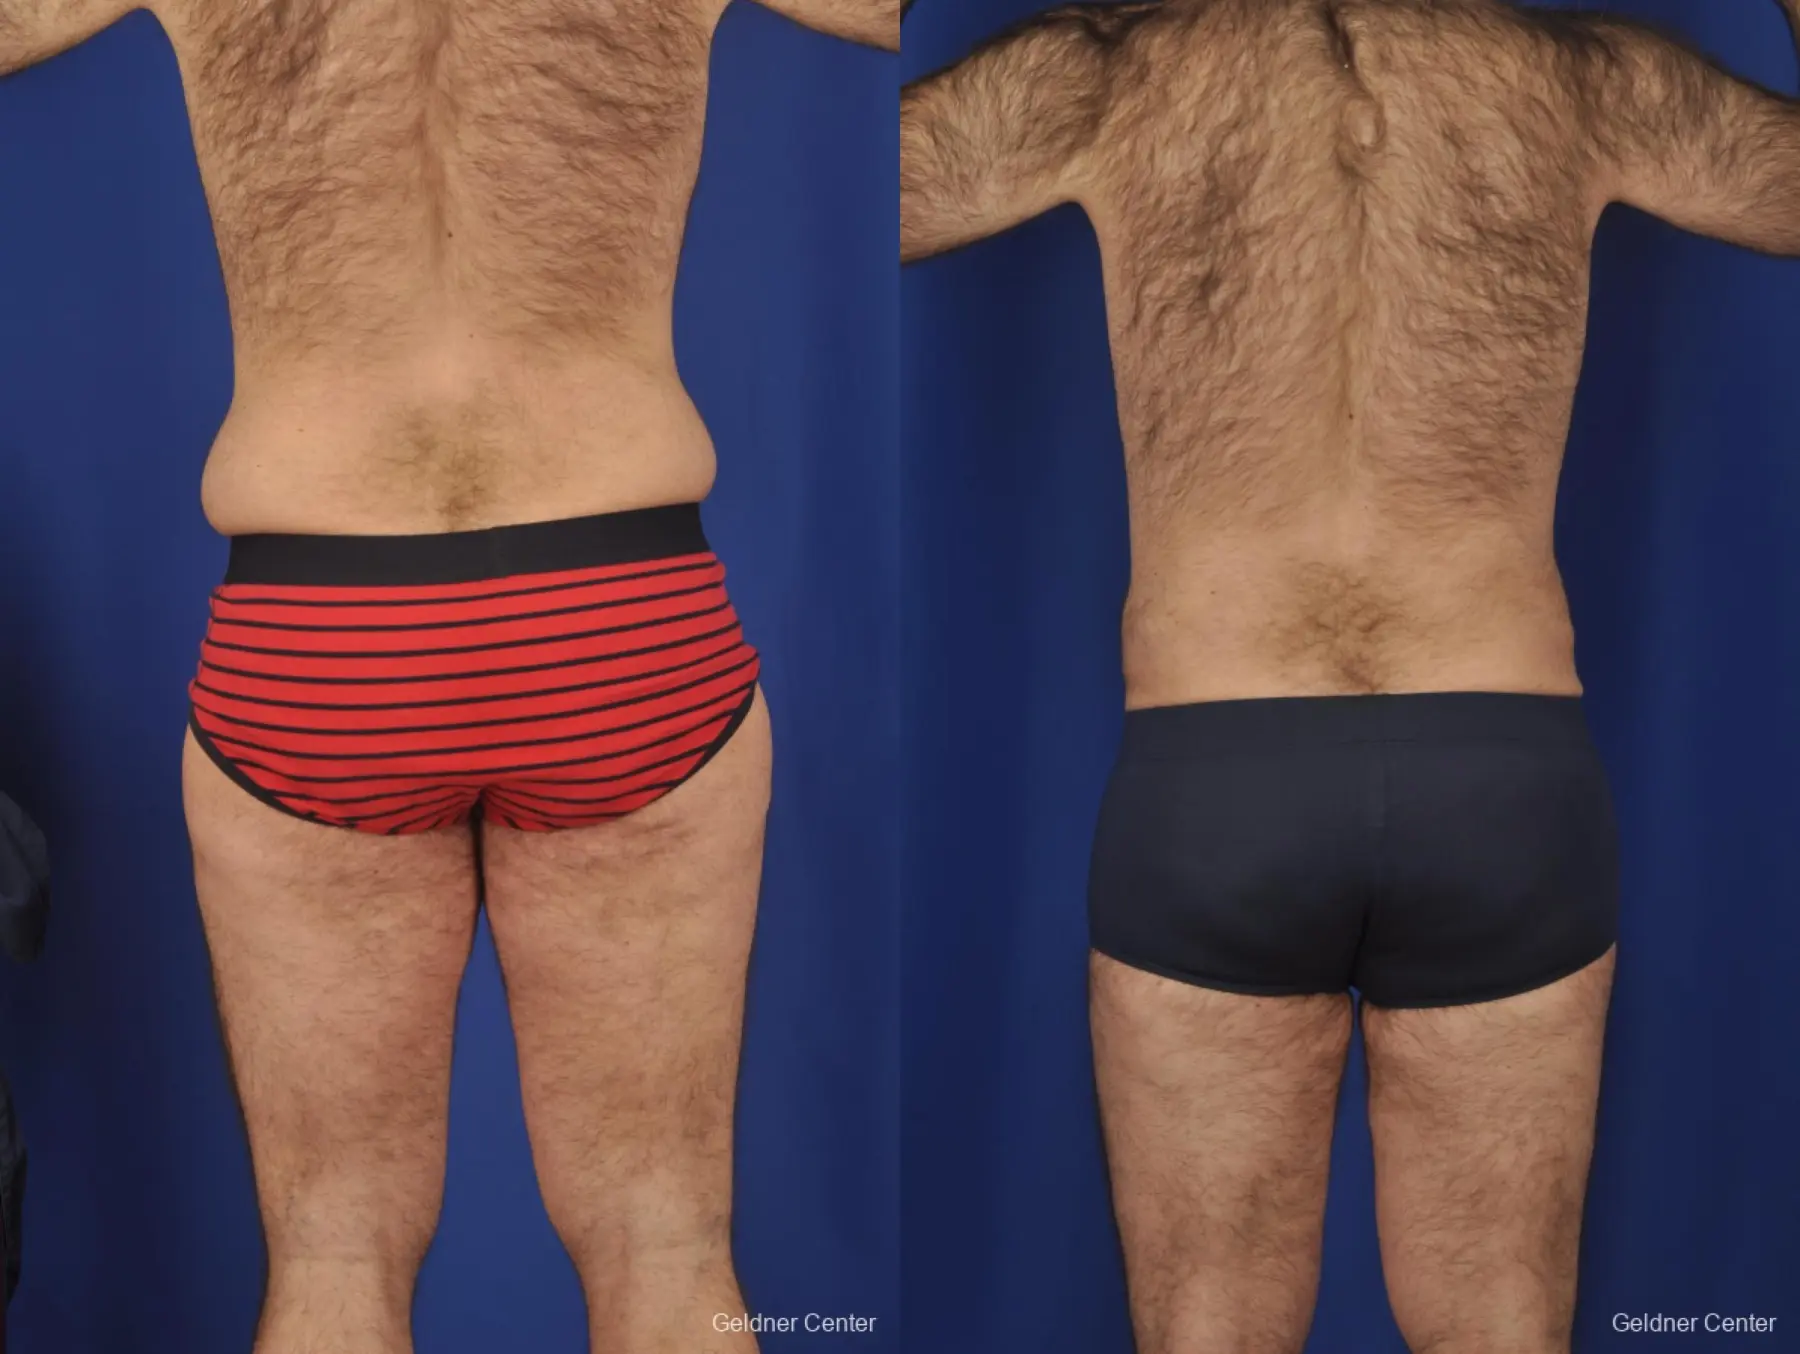 Abdominoplasty For Men: Patient 1 - Before and After 4